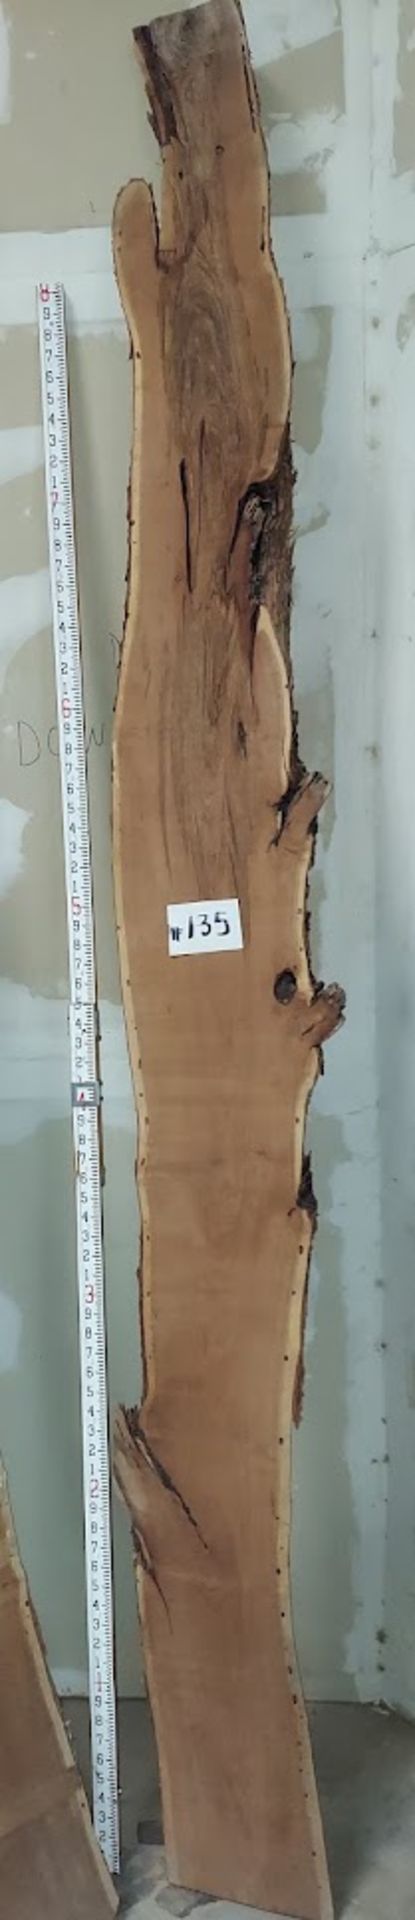 Mesquite Hardwood Lumber Slab, Size is approx. 108" x 9" - 11" x 2" Thick